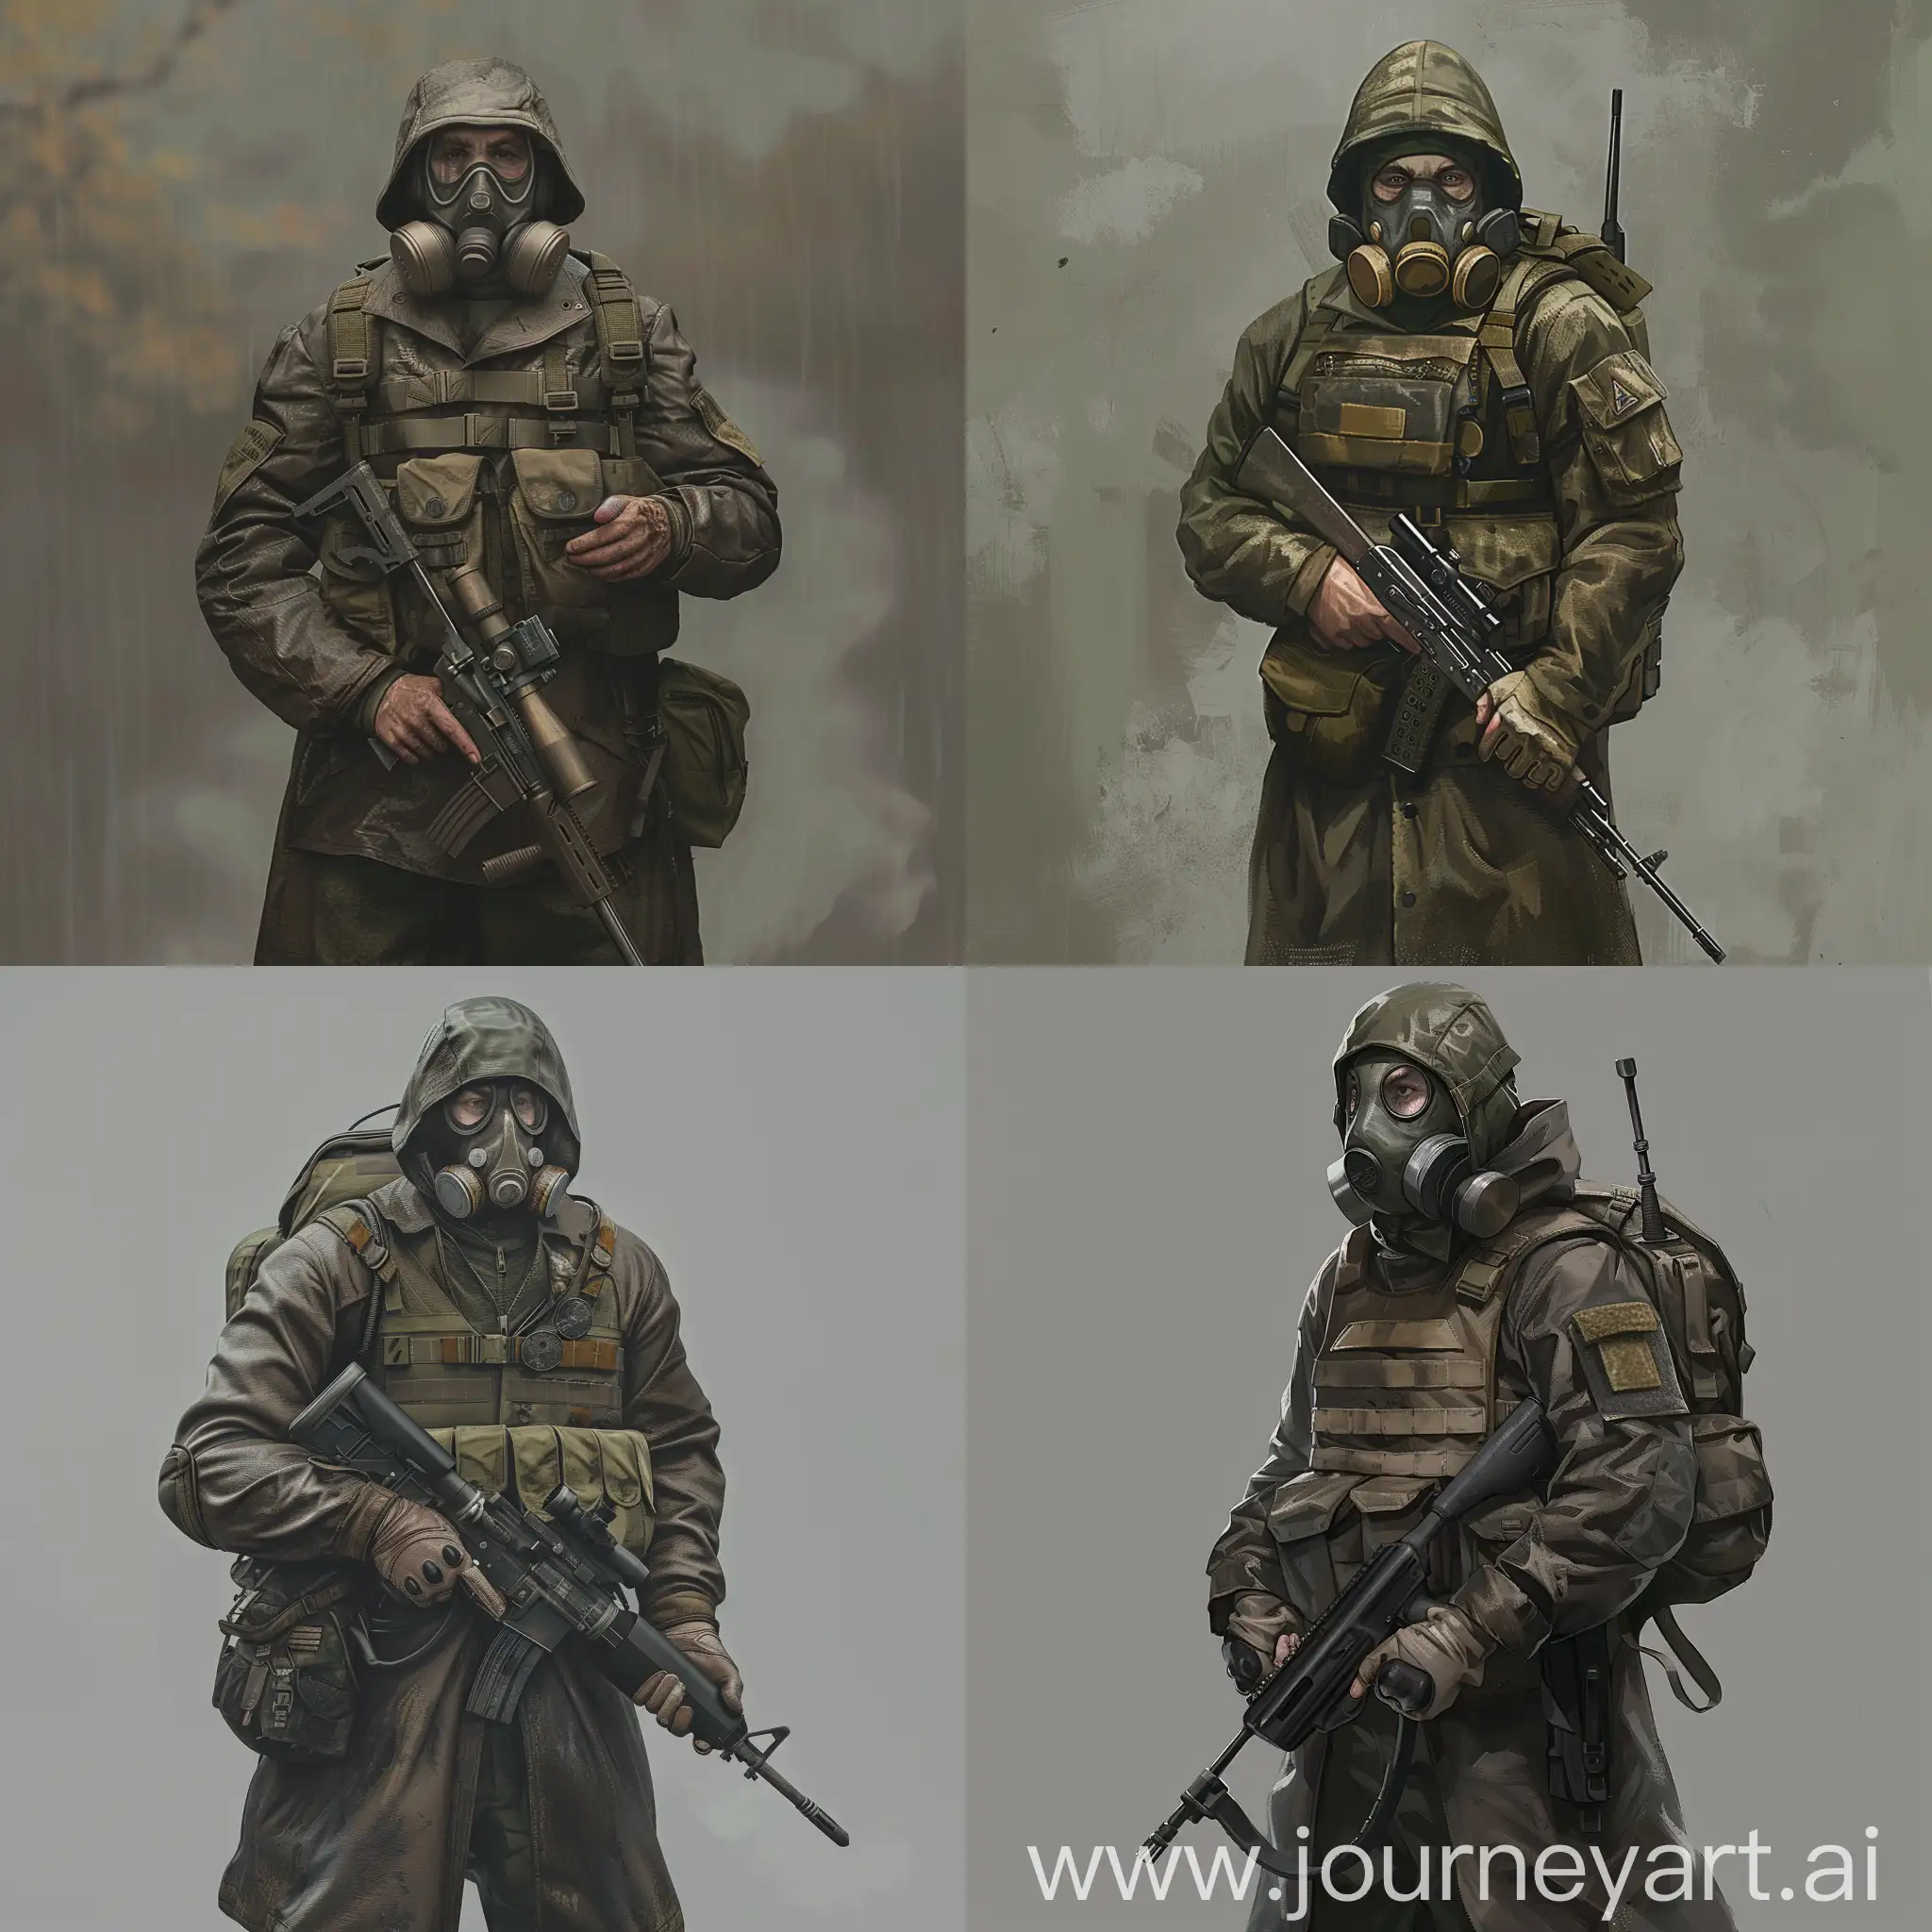 Concept character art, digital design art, stalker from the STALKER, an respirator-gasmask on the stalker face, a stalker in a dark brown military raincoat, a bulletproof vest on his body, a small backpack on his back, a sniper rifle in his hands.